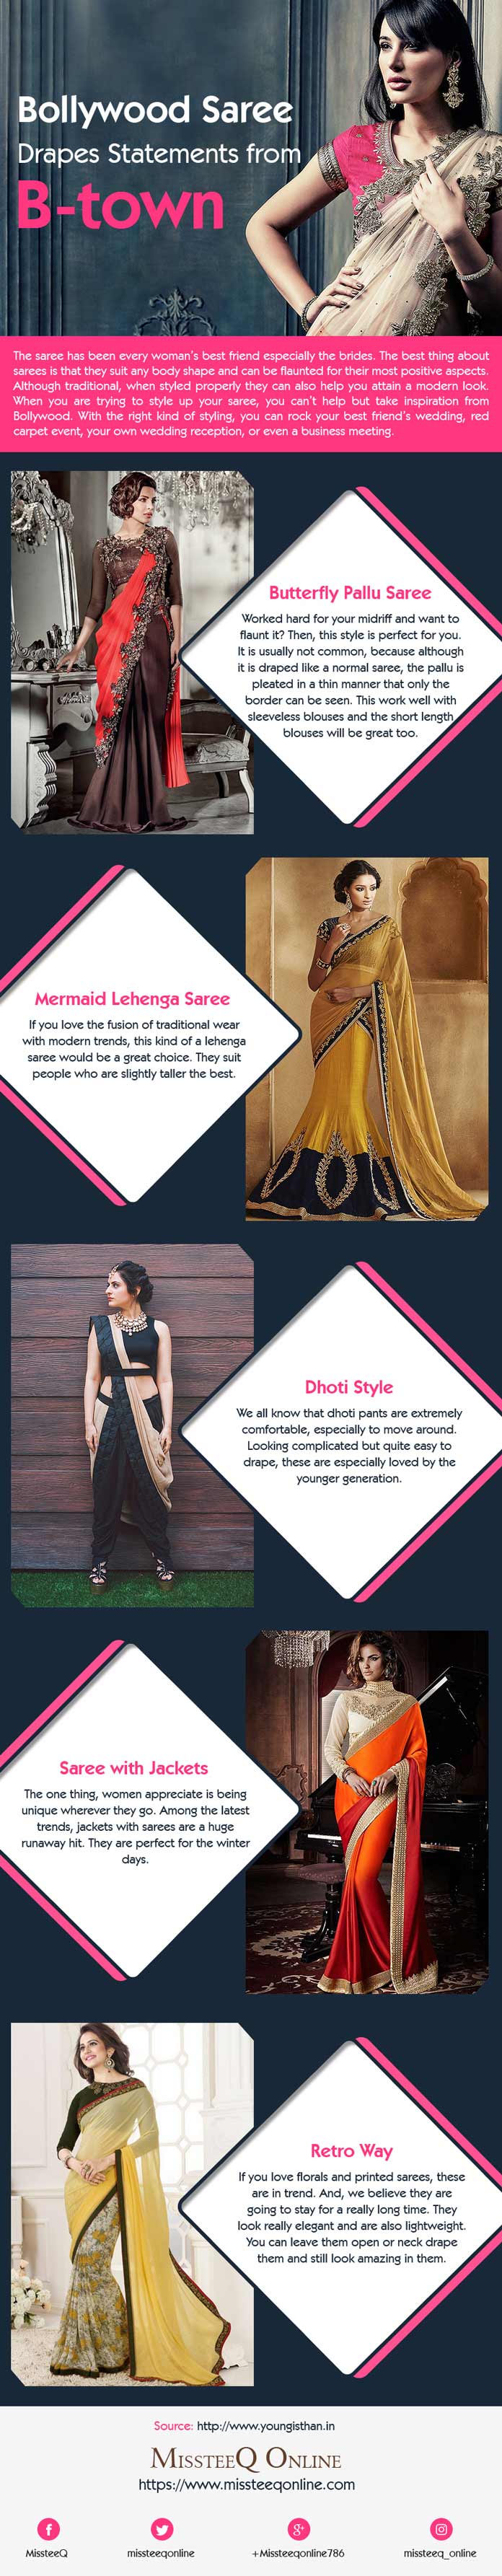 Bollywood-Saree-Drapes-Statements-from-B-town